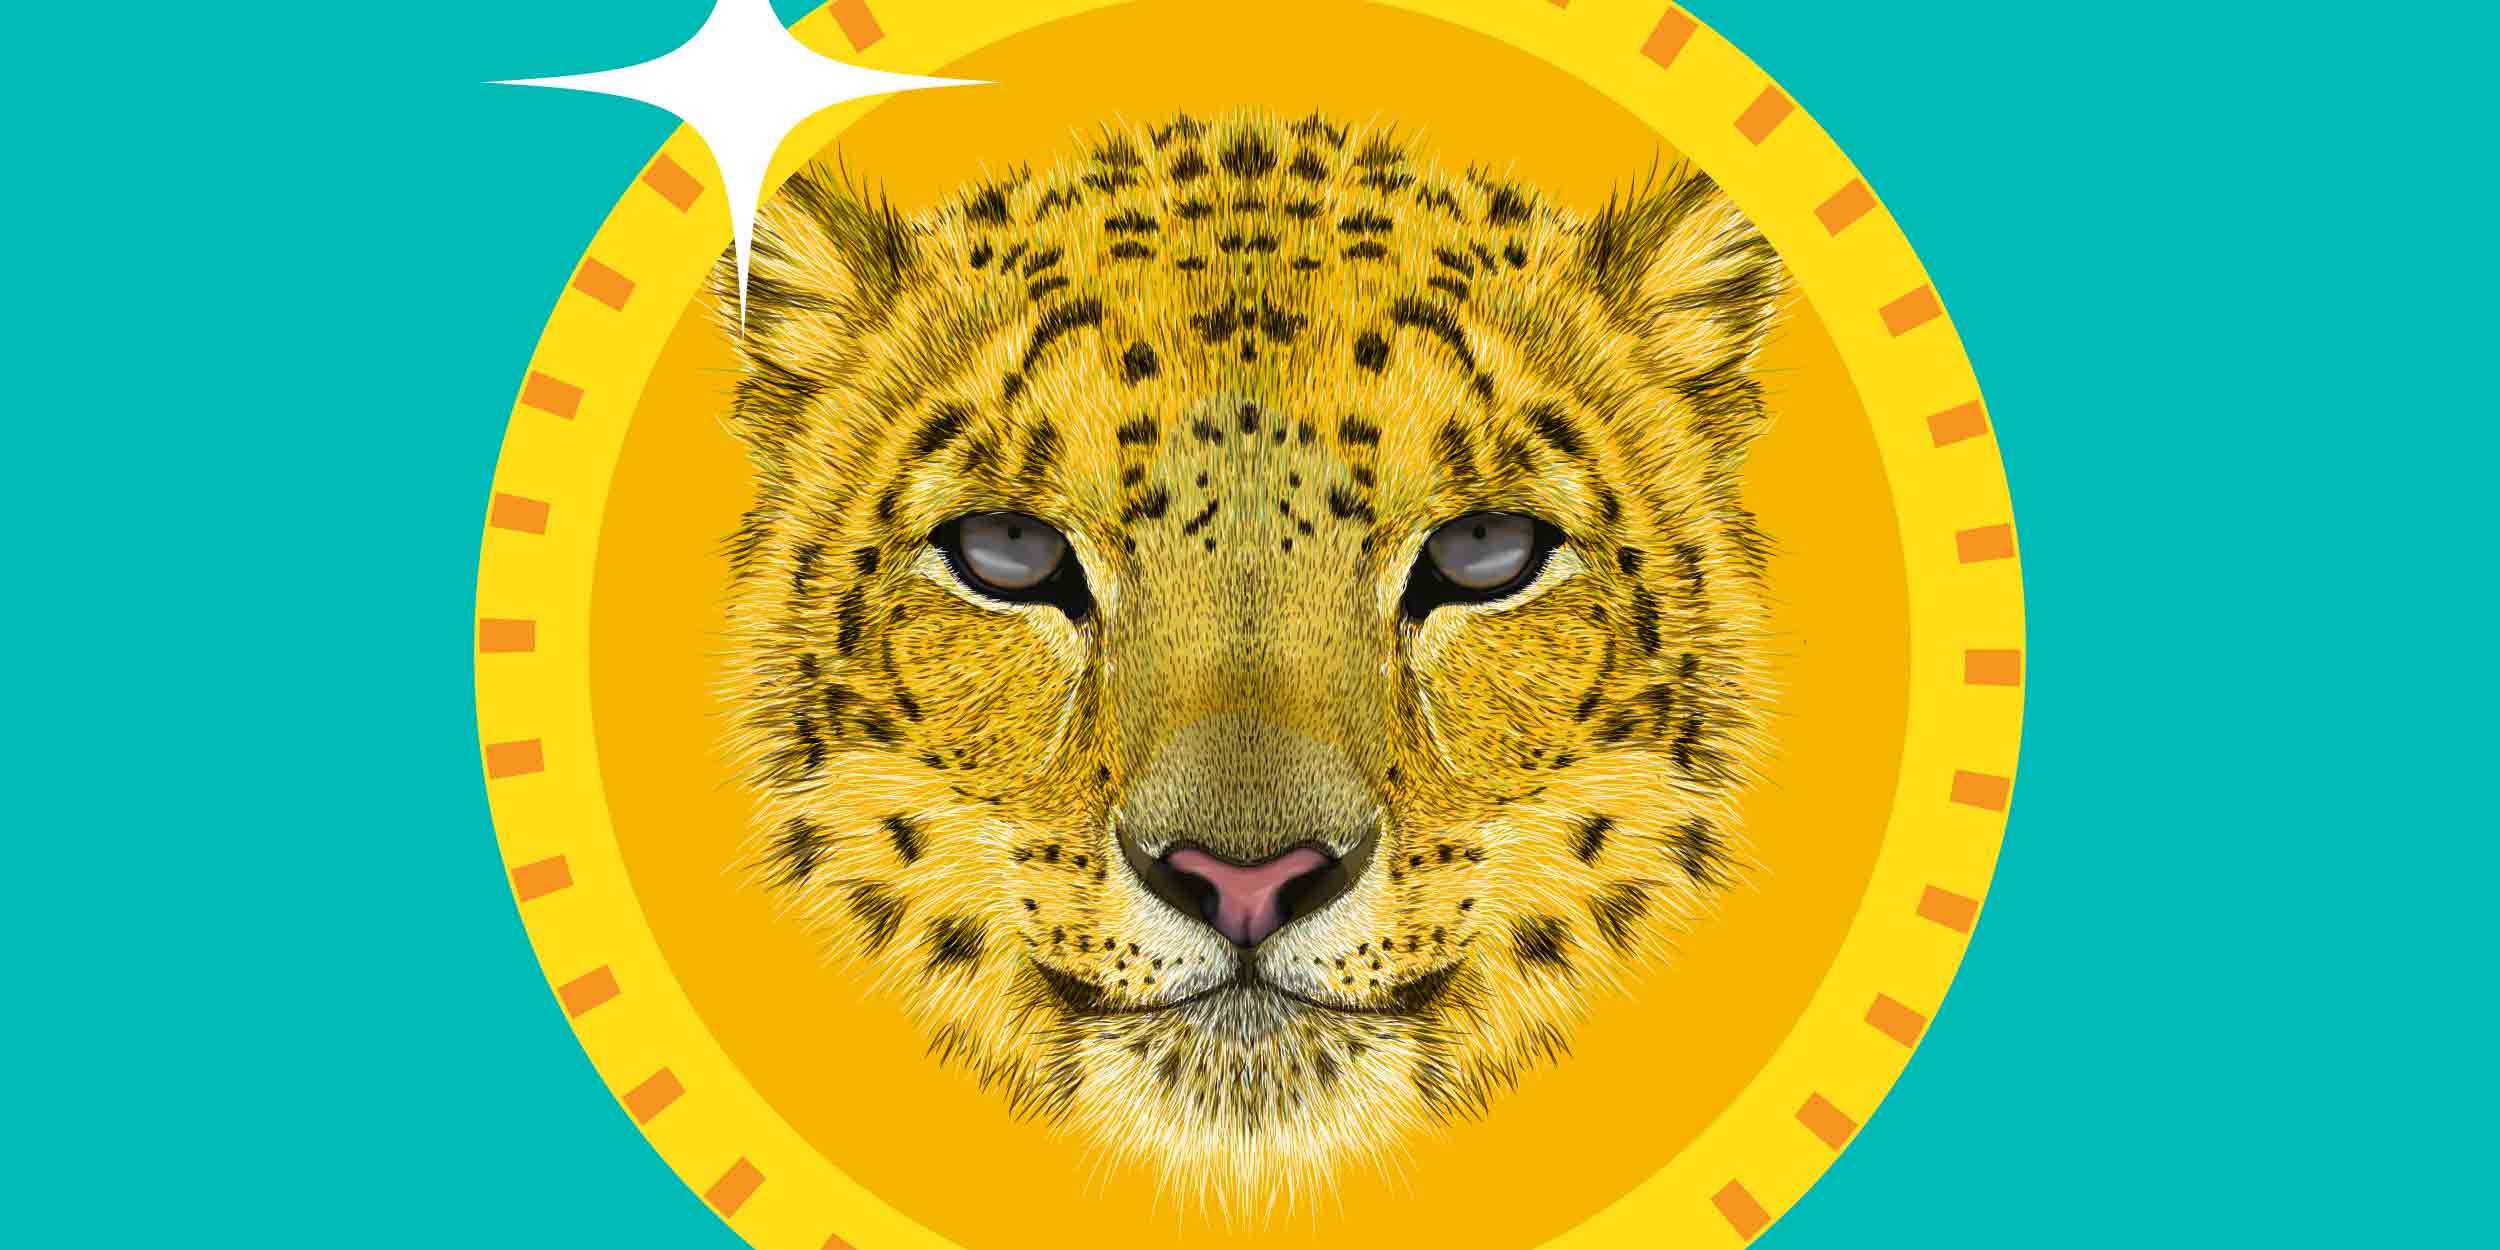 illustration of a leopard in the center of an award symbolizing the amazing digital storytelling done by the nonprofit Snow Leopard Trust